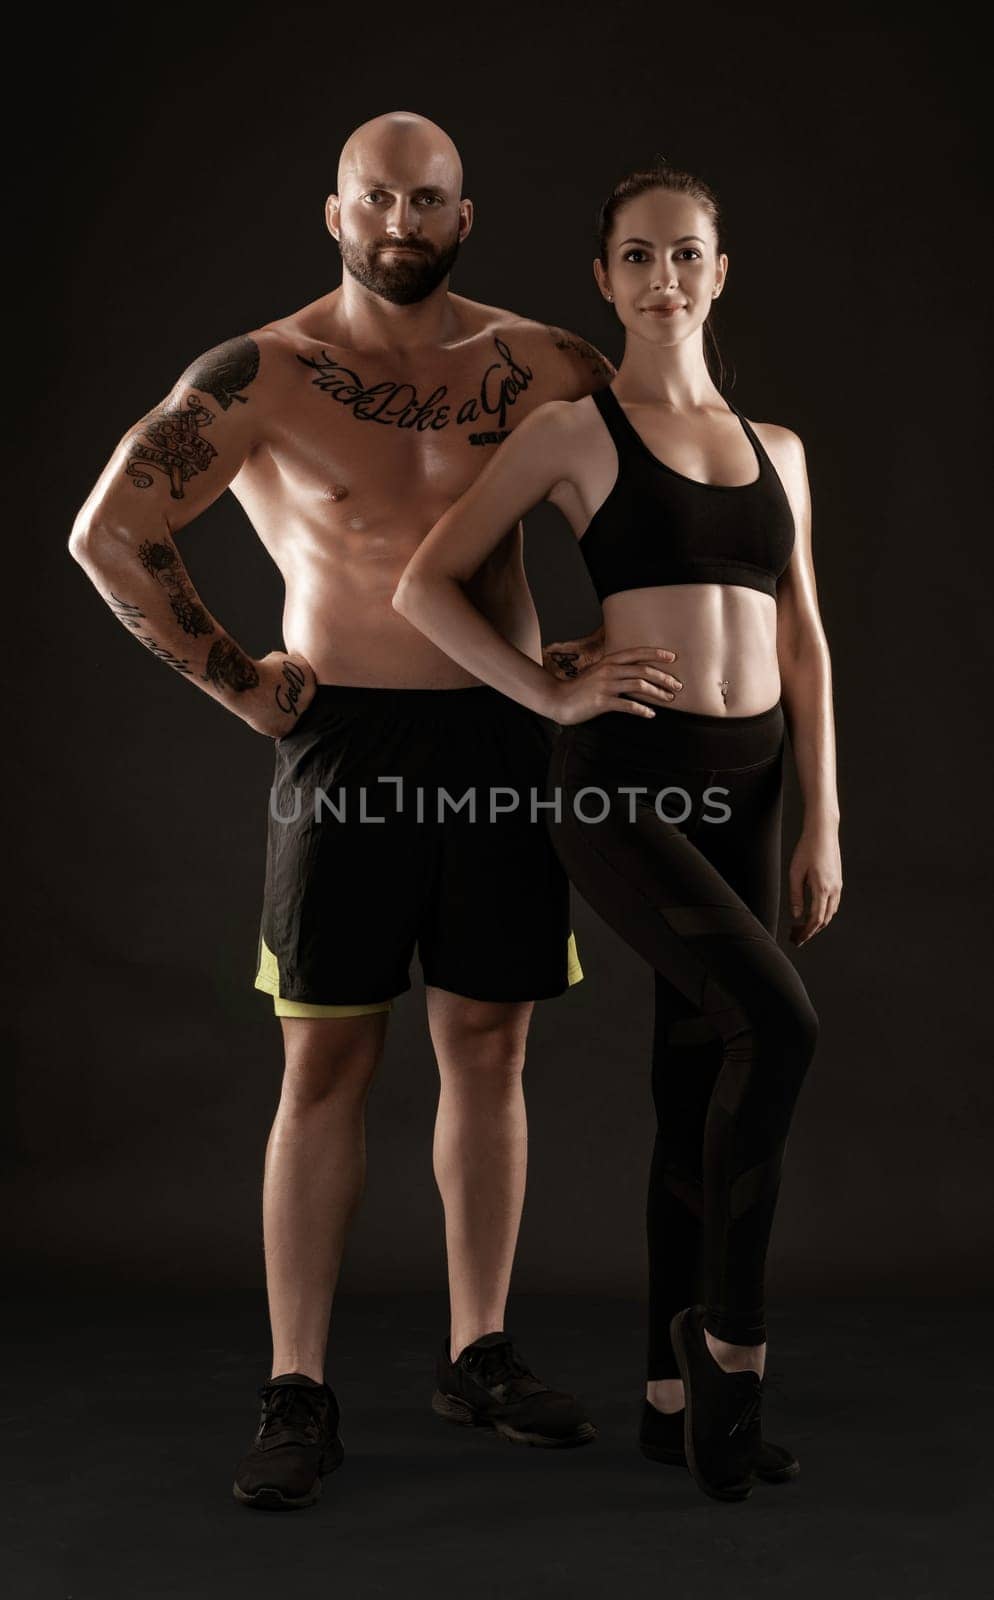 Strong bald, tattooed fellow in black shorts and sneakers with charming brunette lady in leggings and top are posing on black background and looking at the camera. Fitness couple, chic muscular bodies, gym concept. The love story.